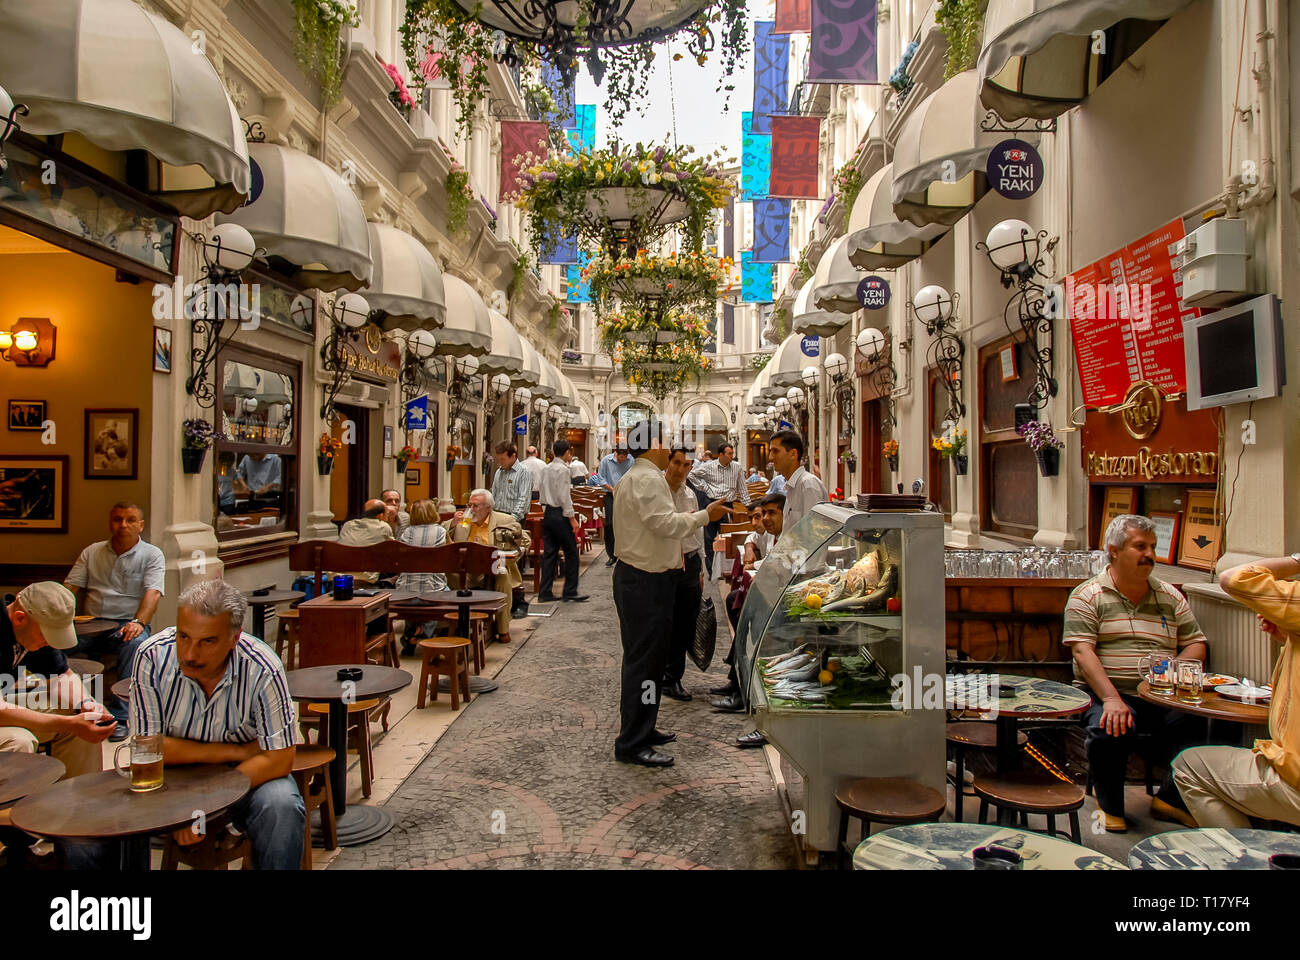 Istanbul, Turkey, 24 May 2006: Cicek Pasaji (literally Flower Passage in Turkish), originally called the Cite de Pera, is a famous historic passage (g Stock Photo